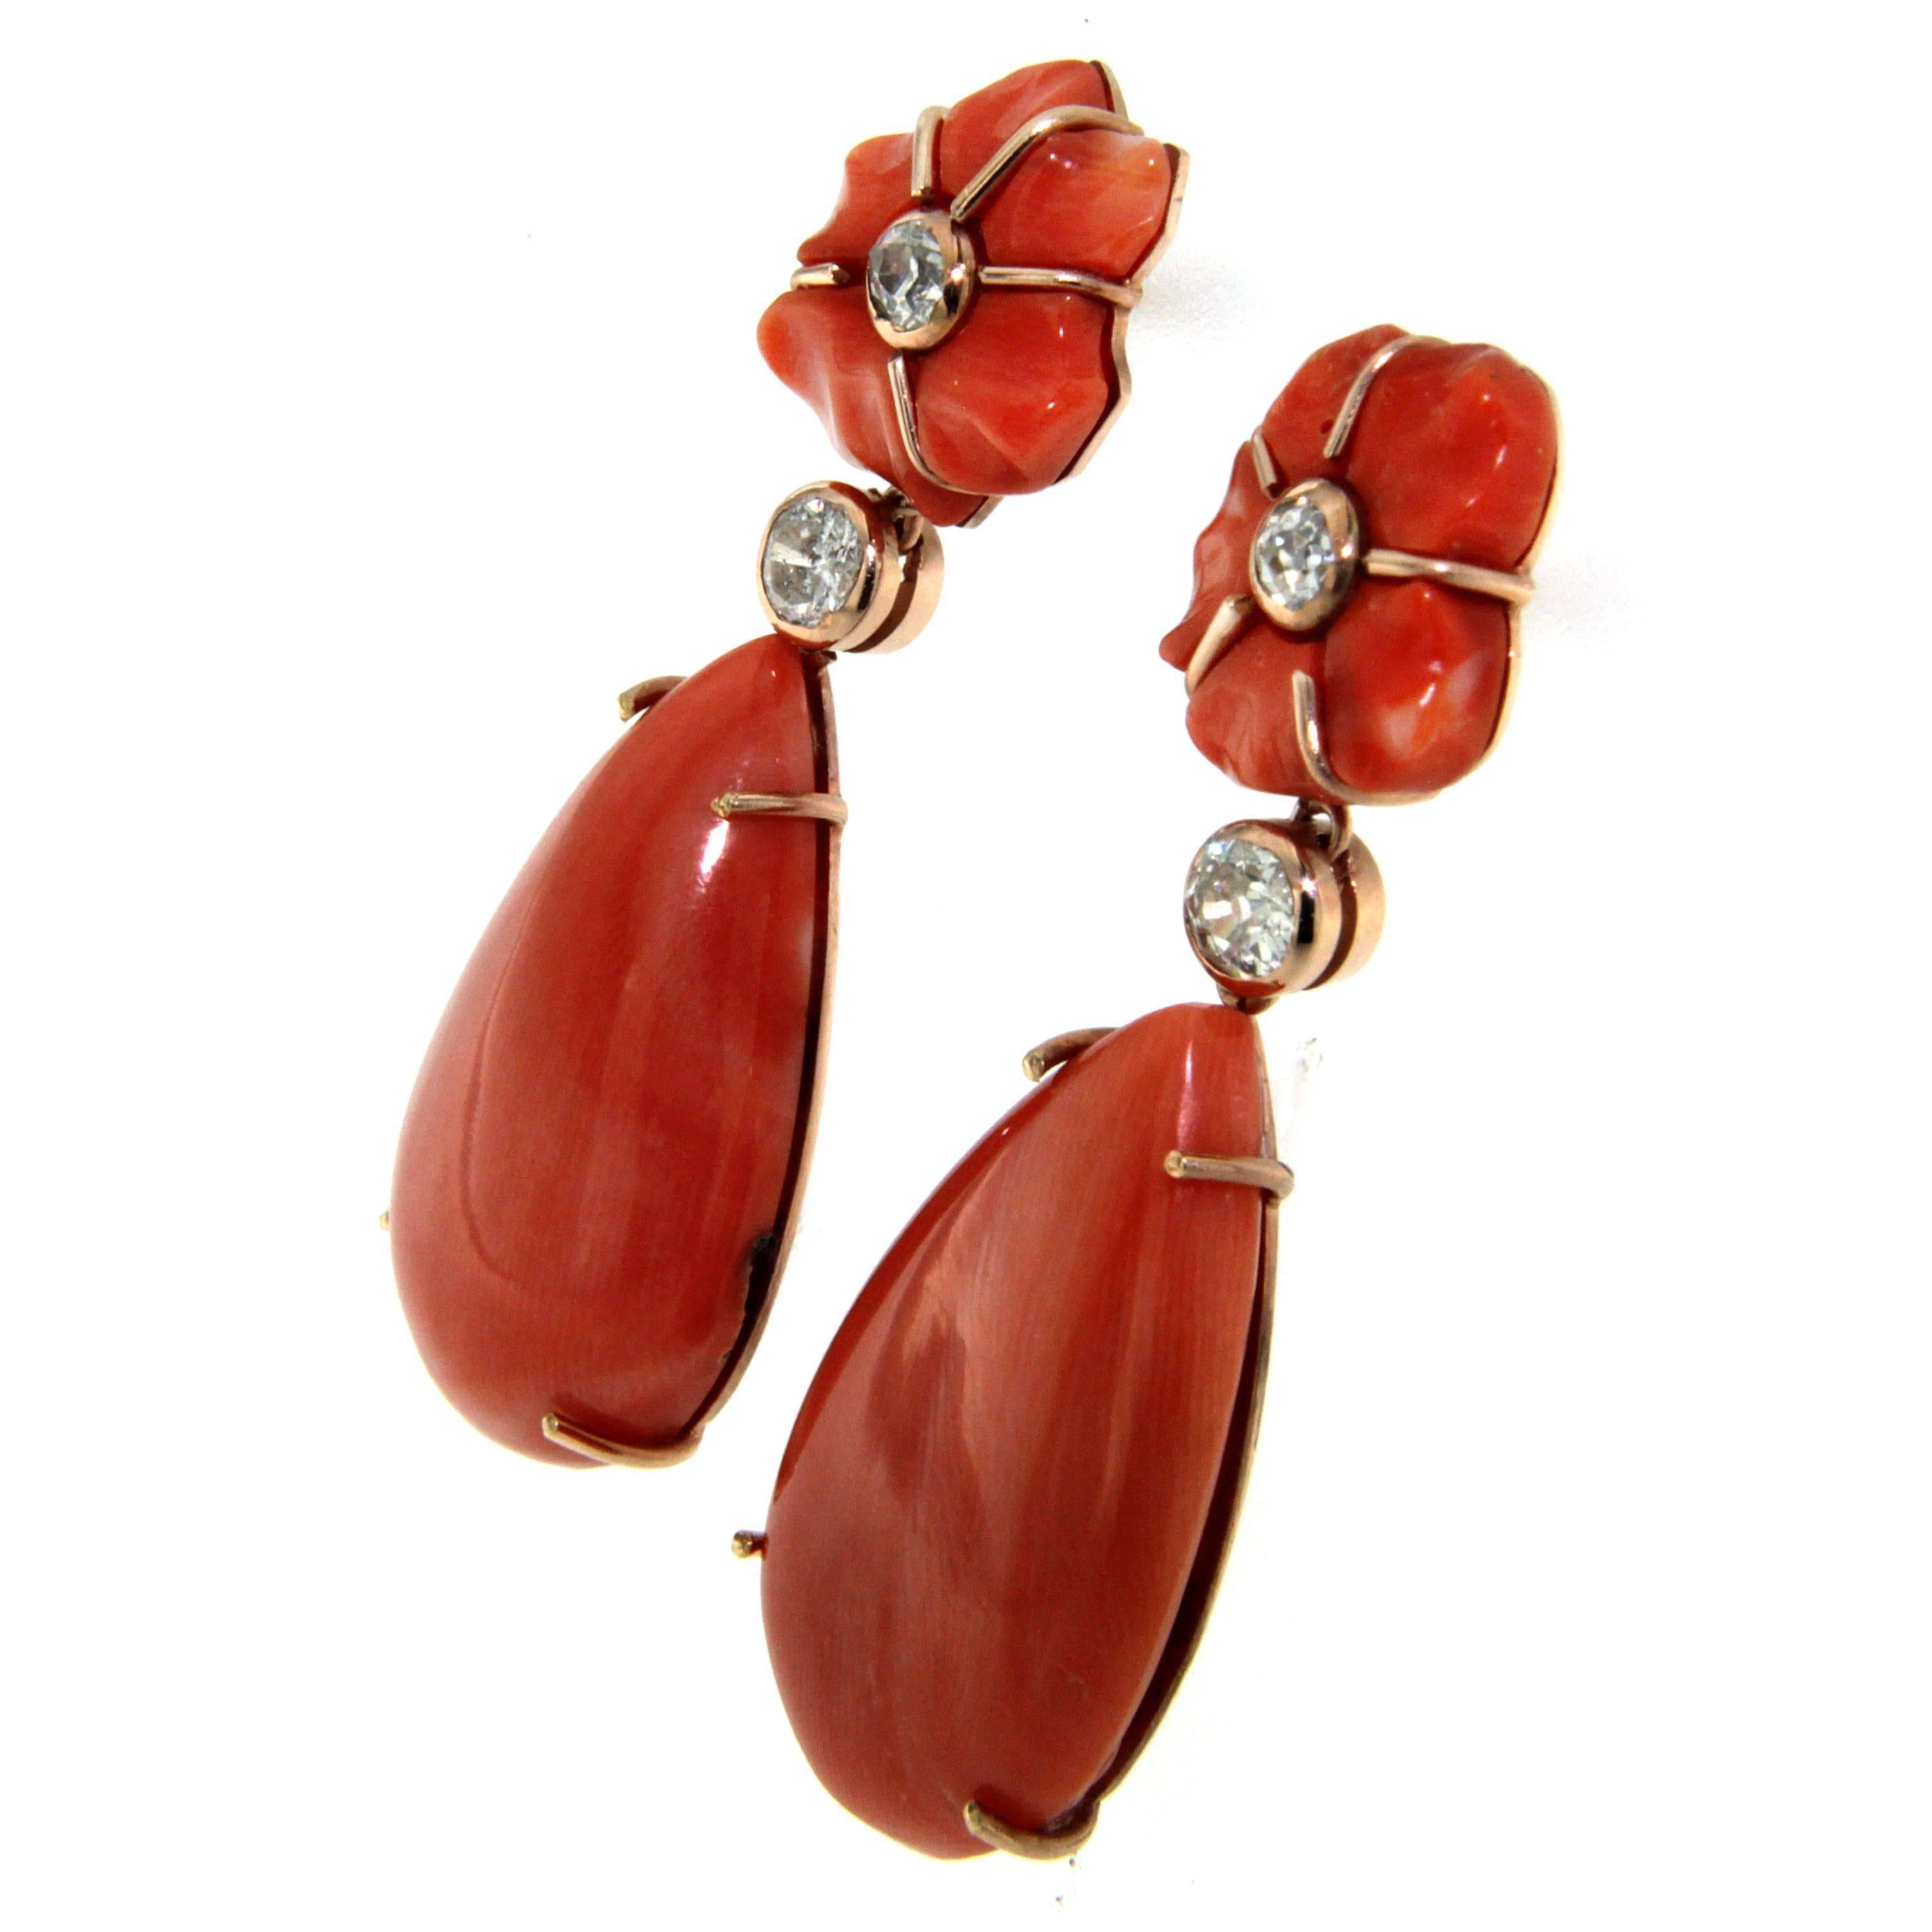 The earrings are made in 18k yellow Gold and features Rubrum Coral (mediterranean) drops and diamonds.

The floral design consists of hand carved coral petals which are set on to a back of gold. In the center a small circular gold setting holds